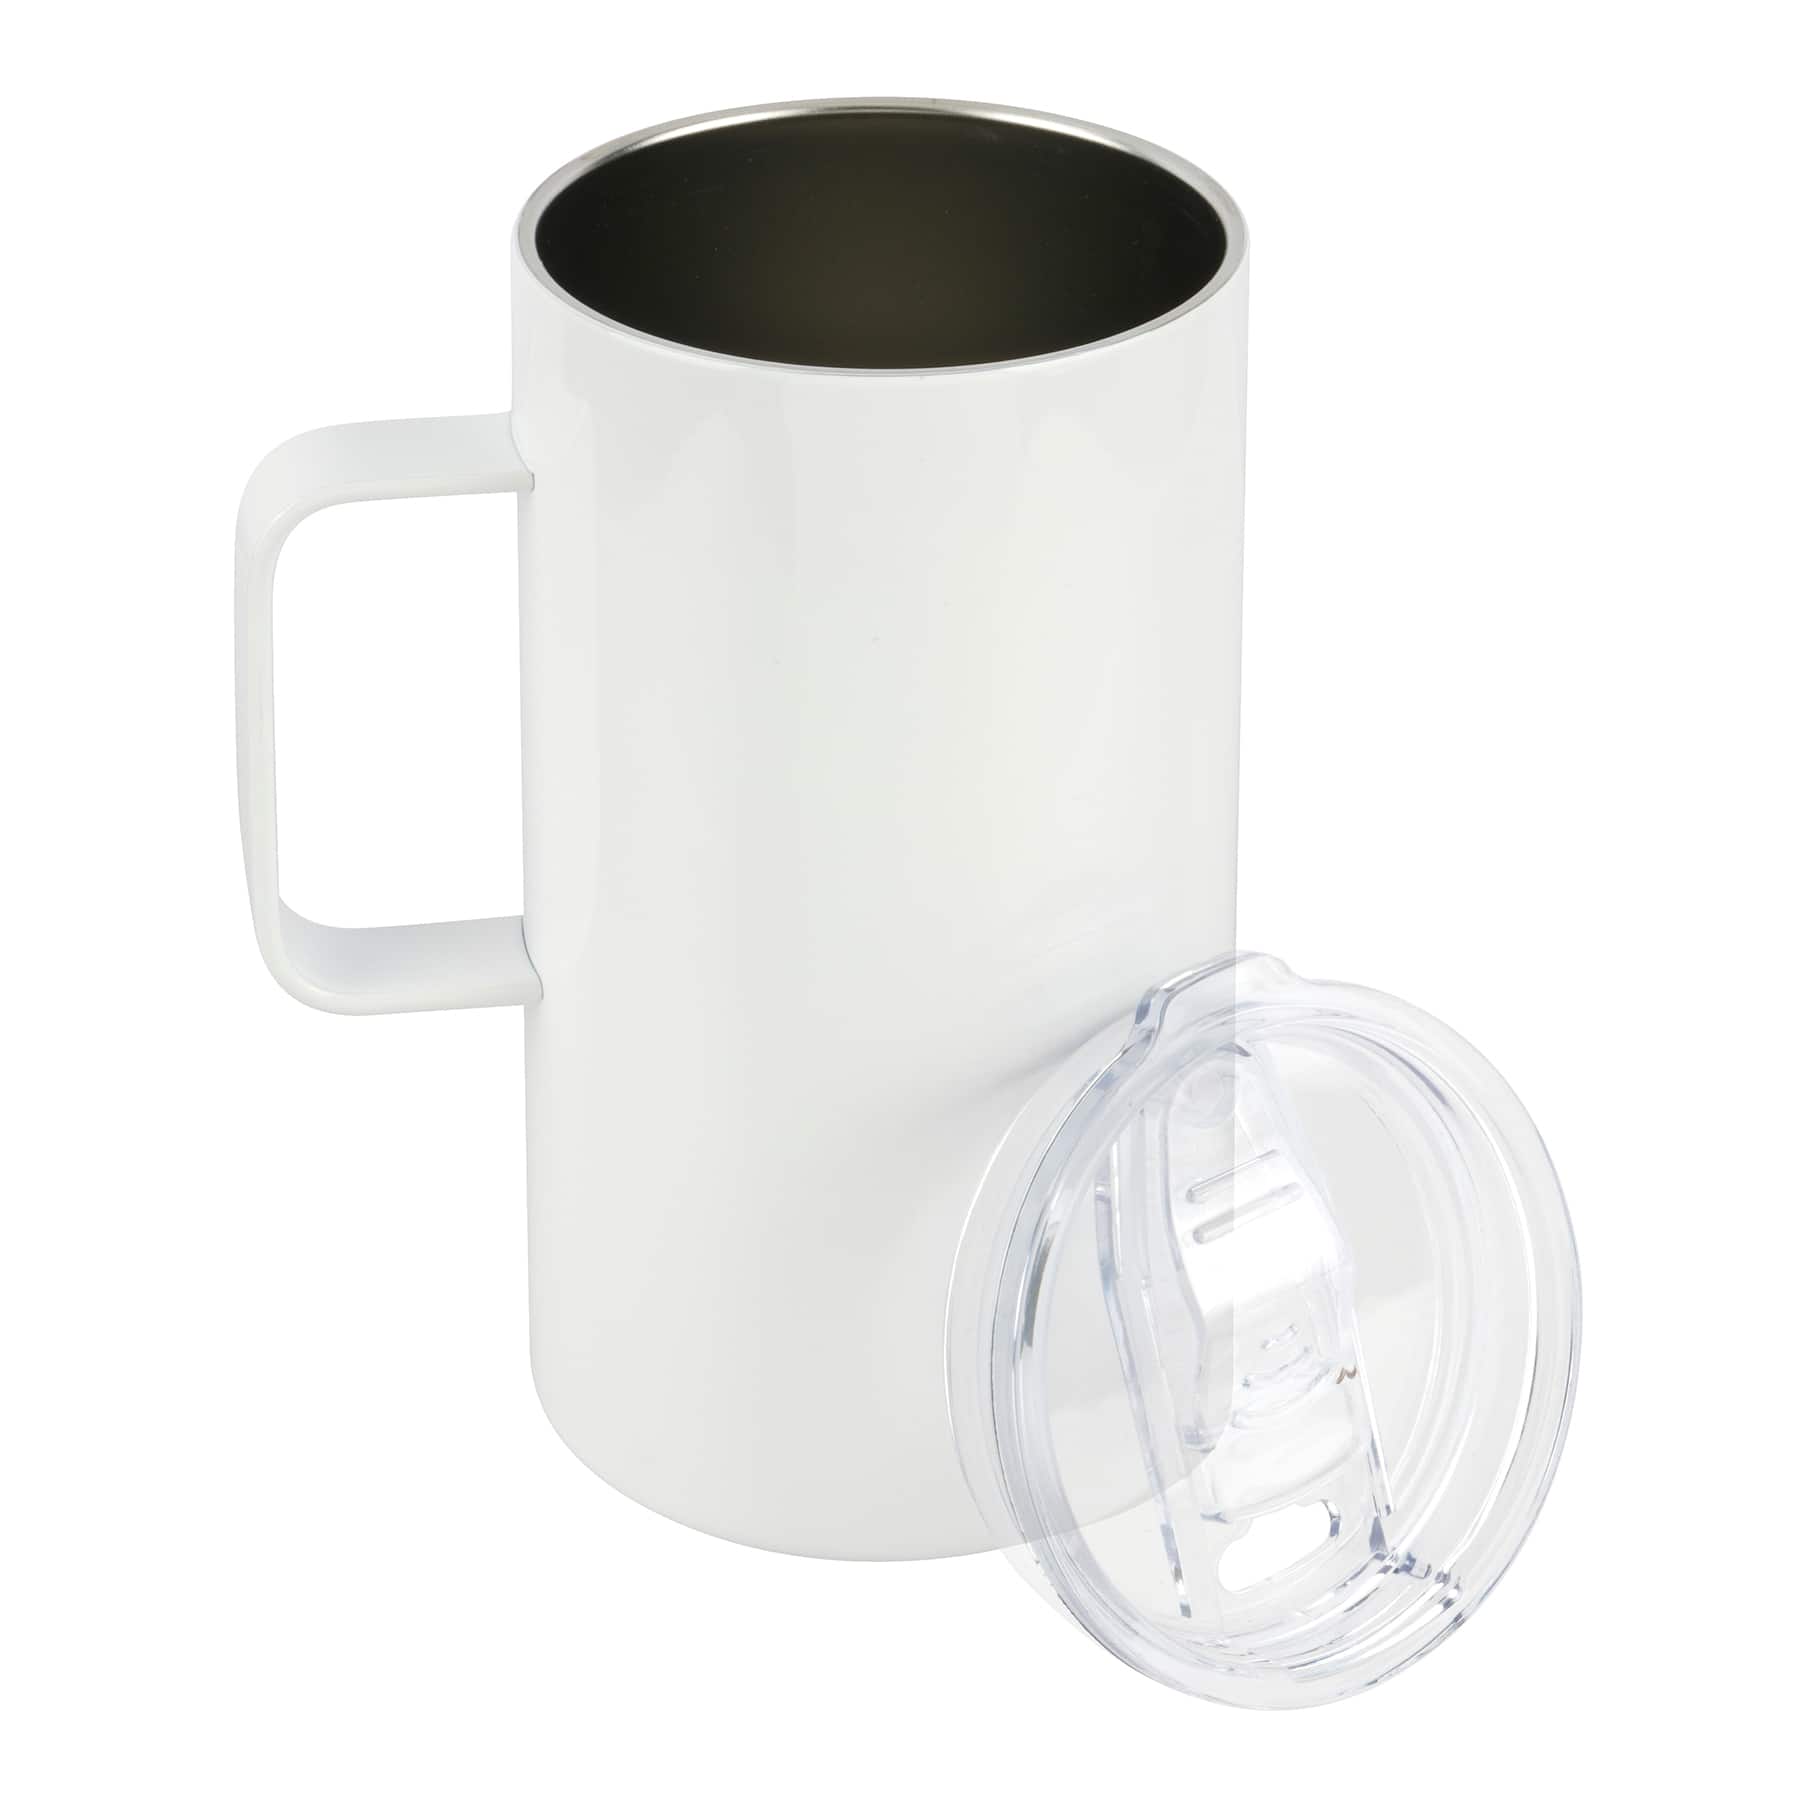 20oz. White Stainless Steel Sublimation Mug with Lid by Make